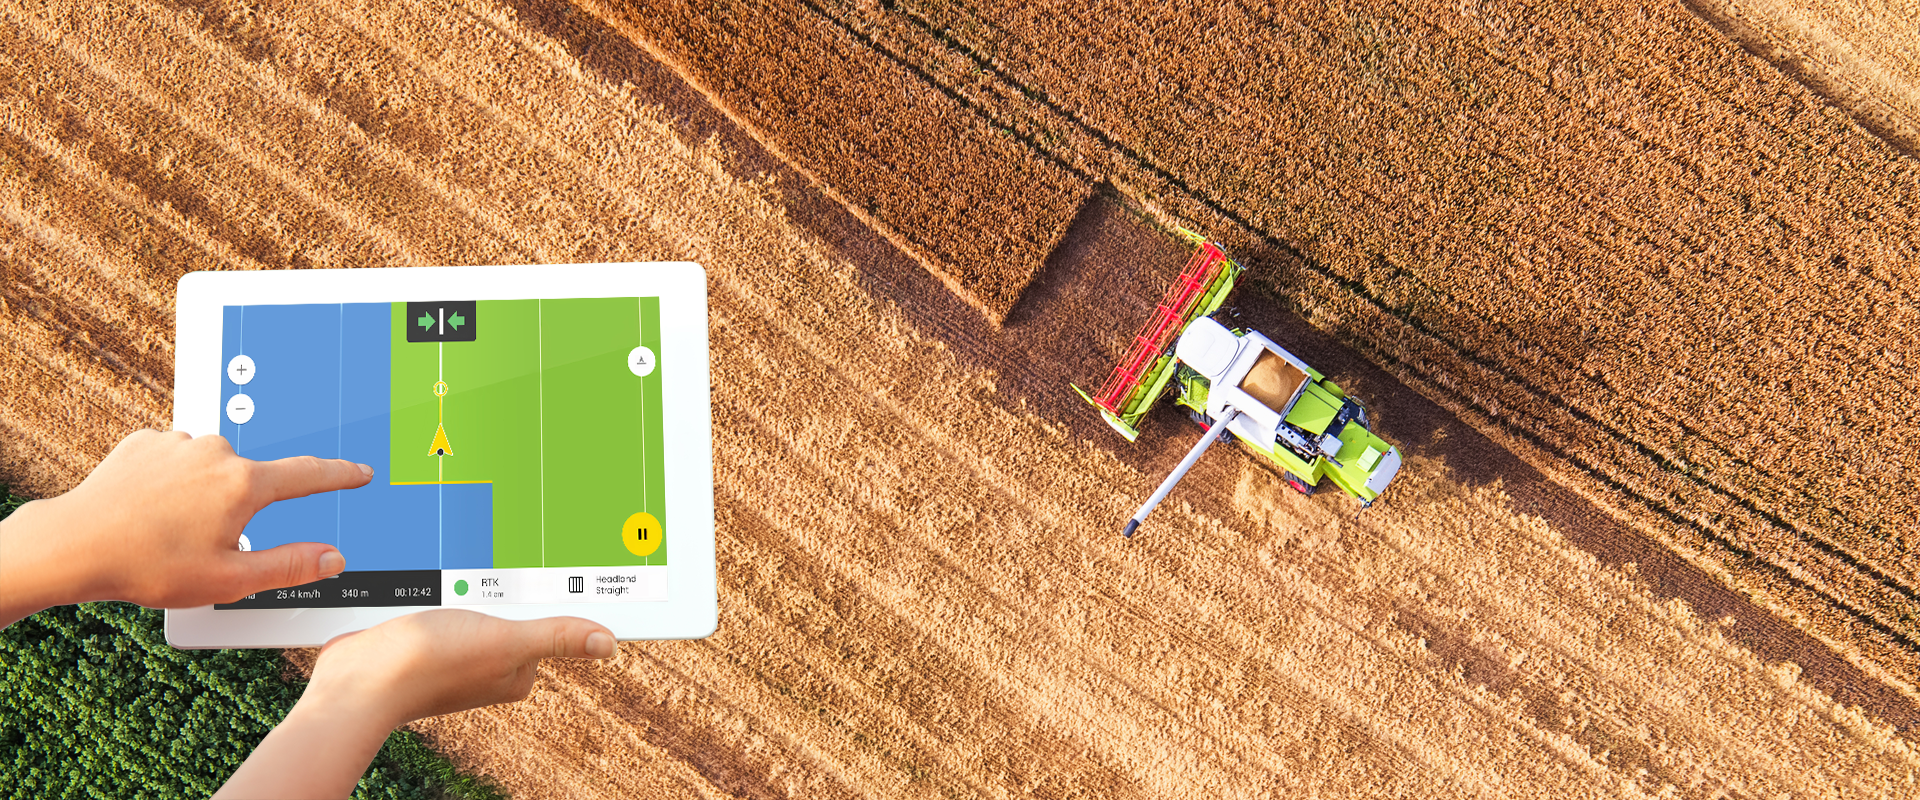 Top 5 things you didn’t know apps for farming could do